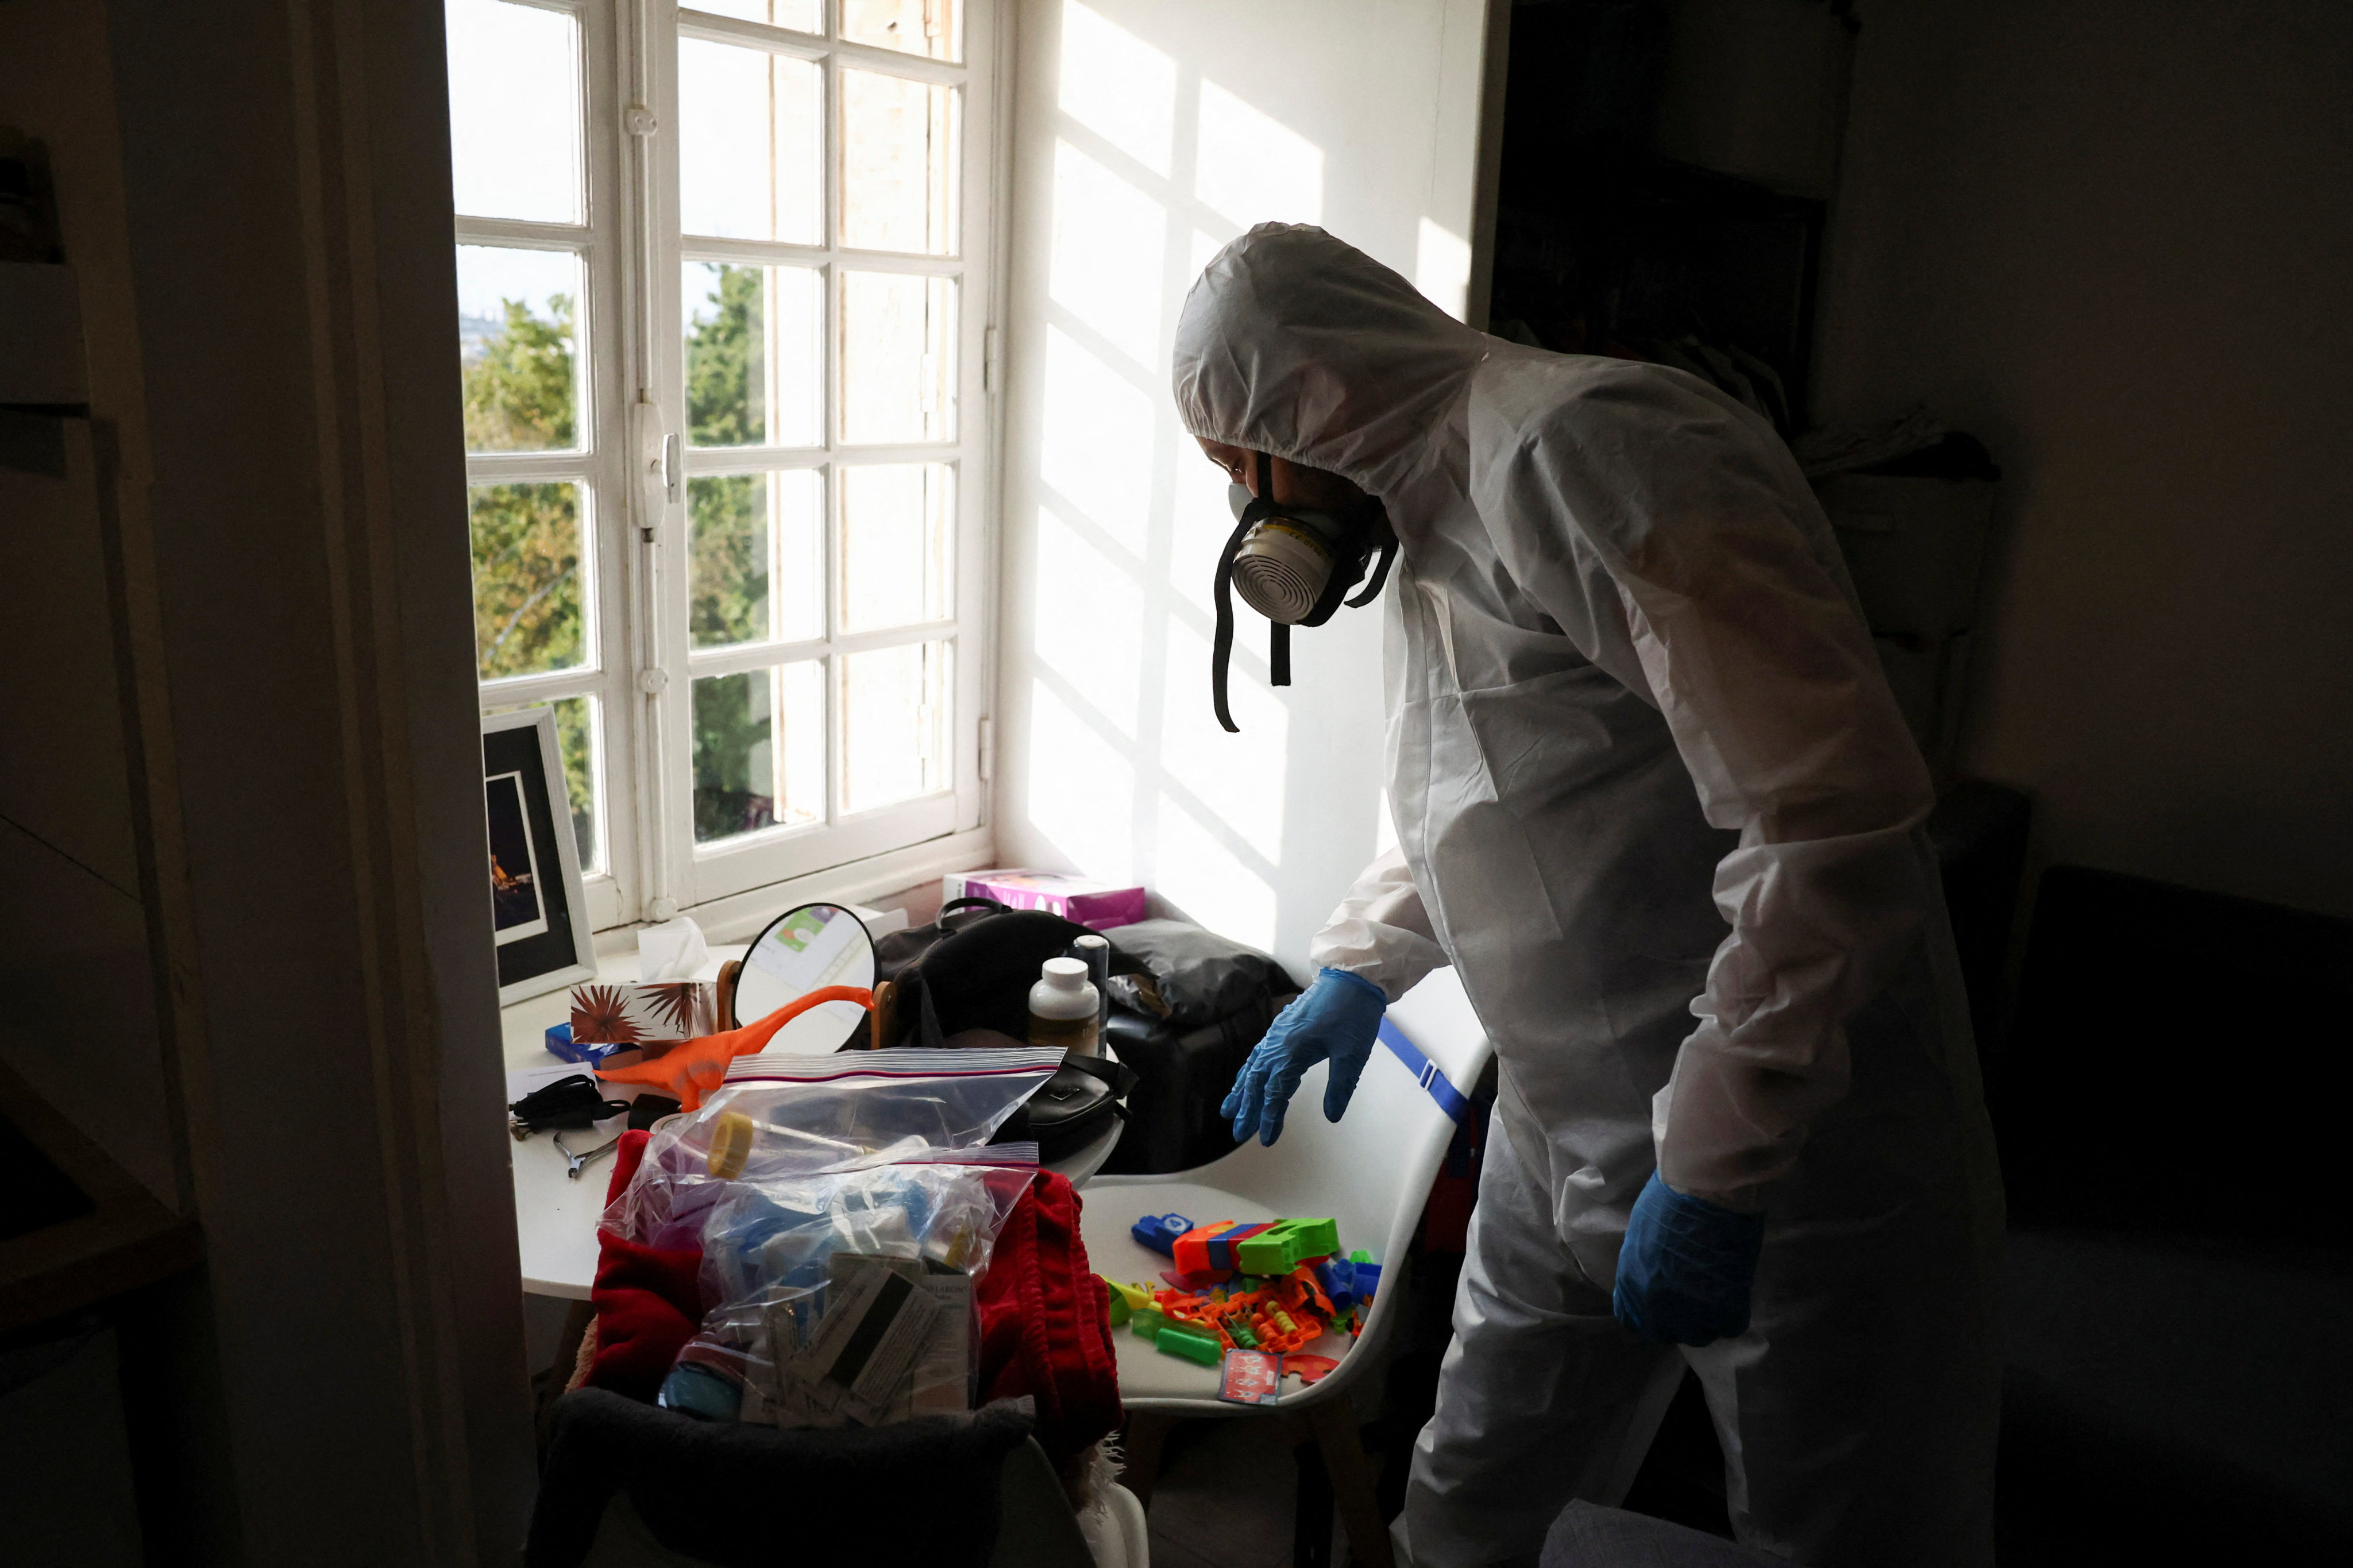 Salim Dahou, a technician from the company Hygiene Premium, inspects an apartment near Paris in order to treat it against bedbugs. Photo: Reuters